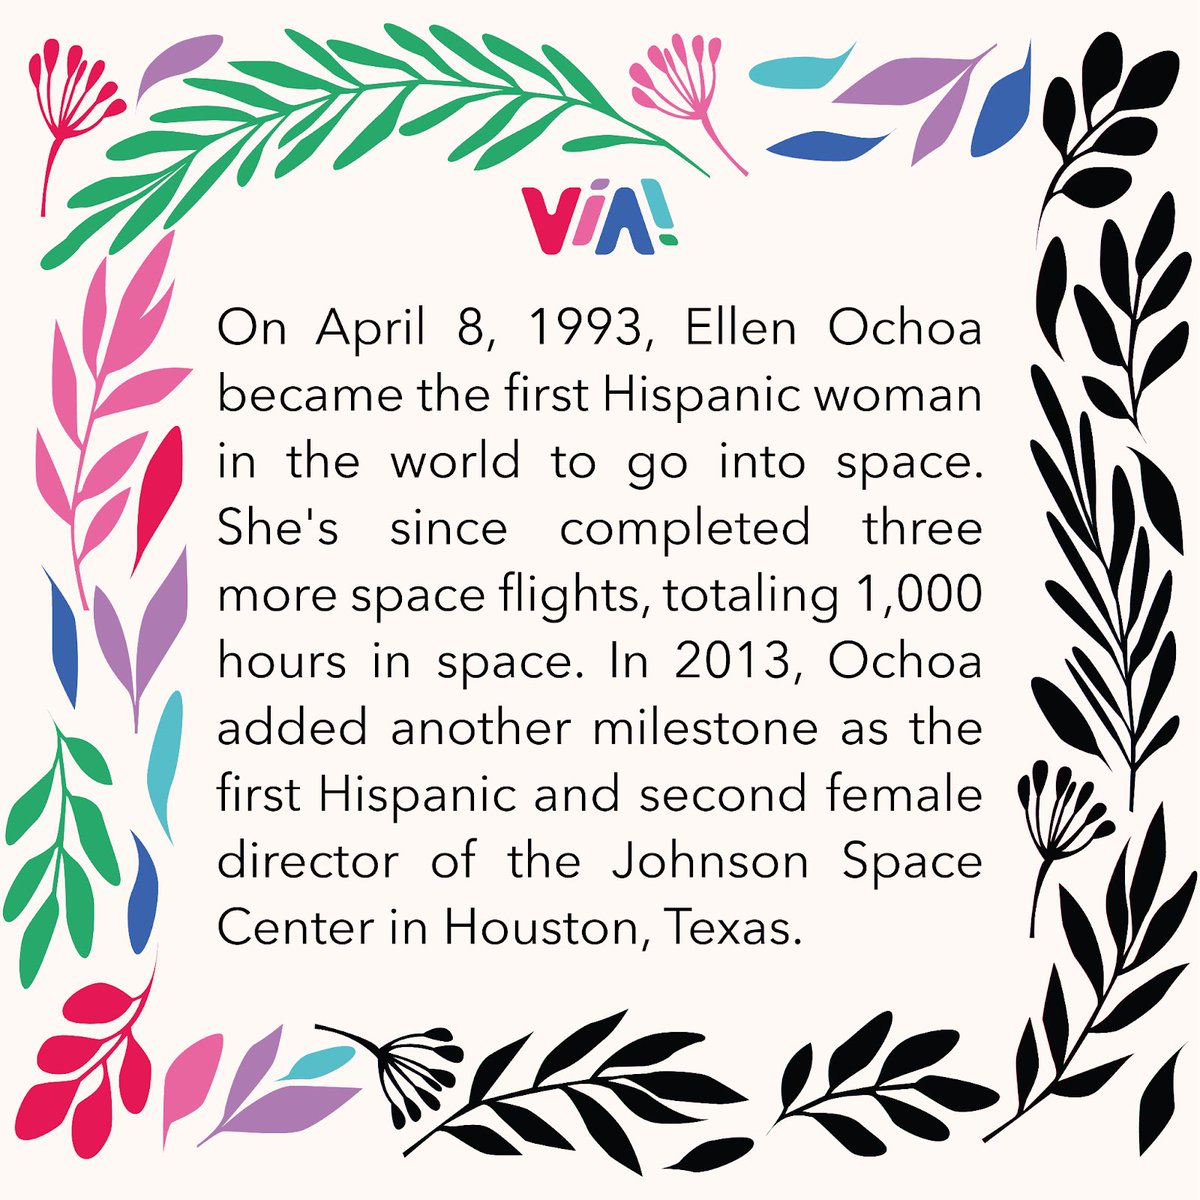 🎉 With Mother’s Day being tomorrow we wanted to celebrate Ellen Ochoa a day early! Ellen’s quote encapsulates a powerful message about resilience & perseverance. Via wishes her a happy birthday on May 10! Learn more about her here tinyurl.com/bdfbsbhy 🥳 #CourageiswhatCounts